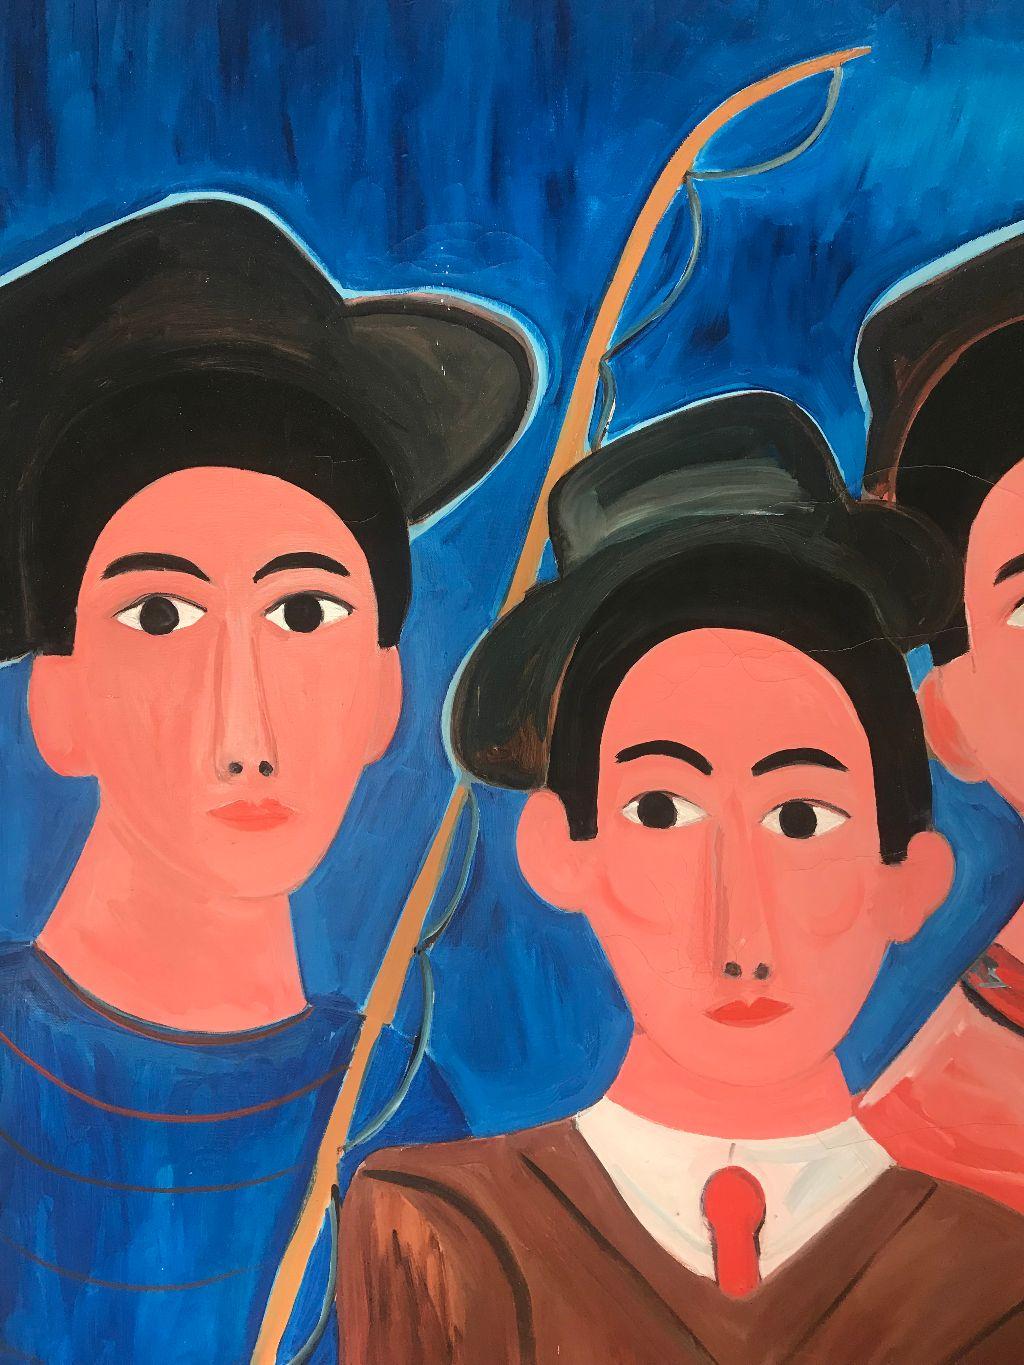 Bold naive figurative painting by New York School artist Kenneth Kilstrom (1922-1995). Painting depicts what appears to be 3 young jewish men preparing to go fishing. They are carrying their fishing rods and fruit and are accompanied by a black